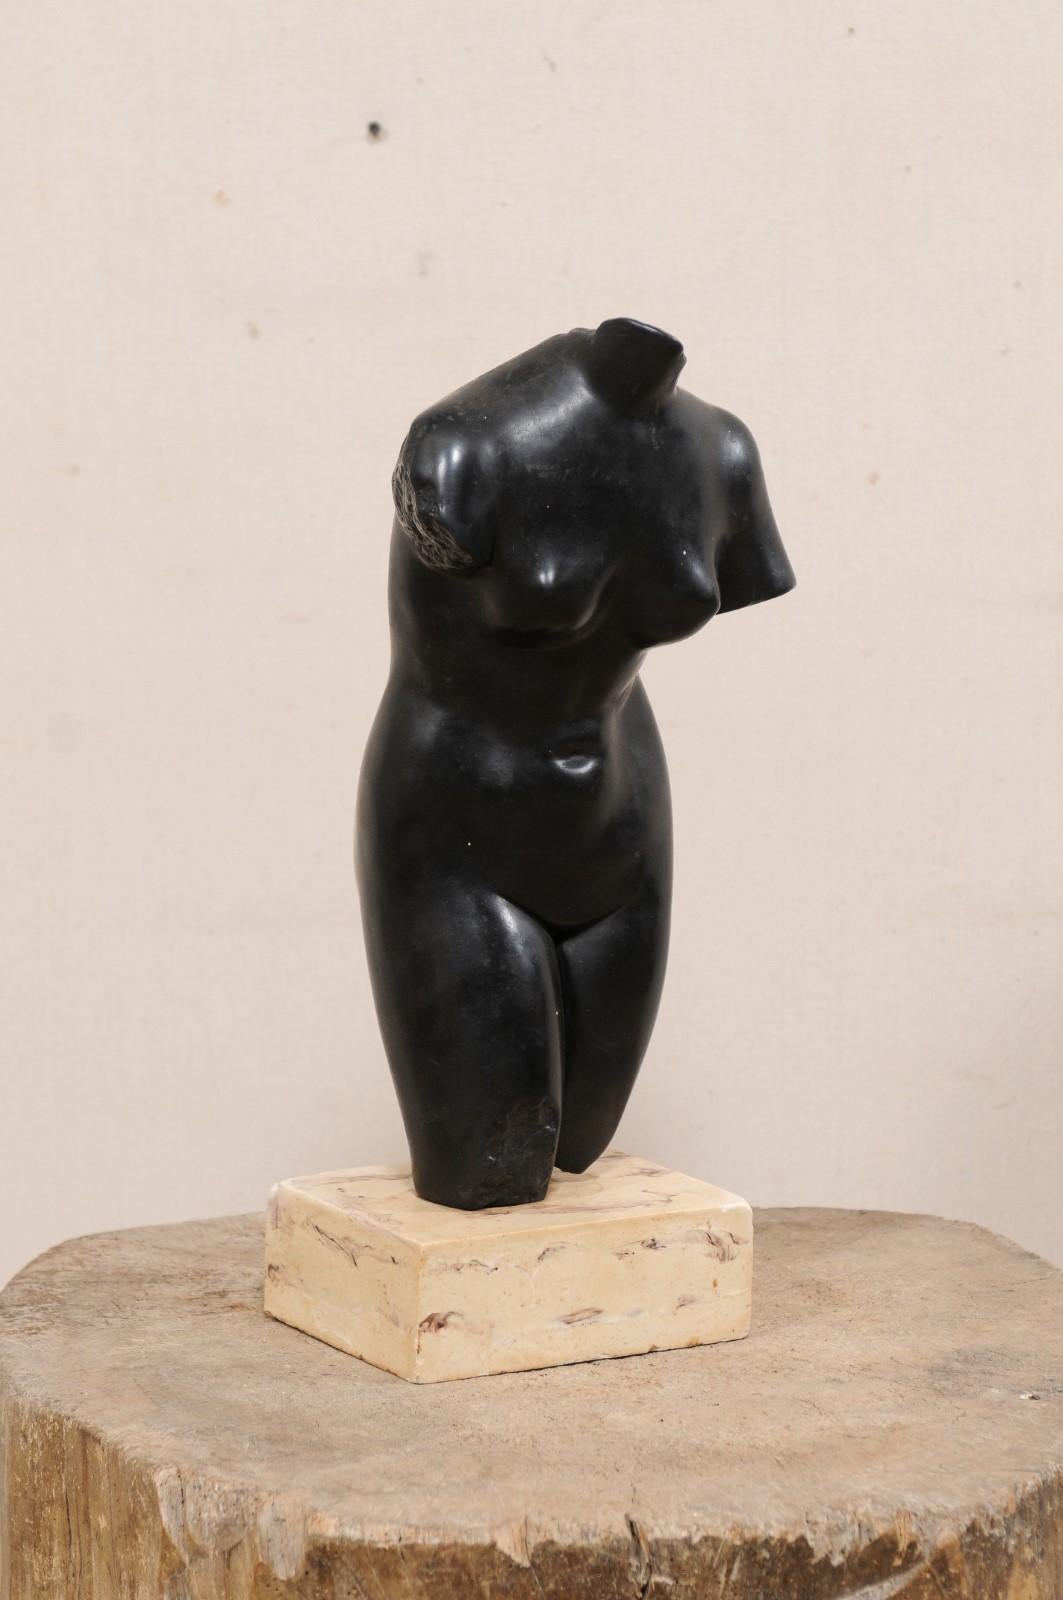 A vintage European nude female torso sculptural art piece. This stone composite statue, which depicts a shapely female torso, or mid region, done in black, and raised upon a contrasting neutral colored squared base. This artisan feminine piece from